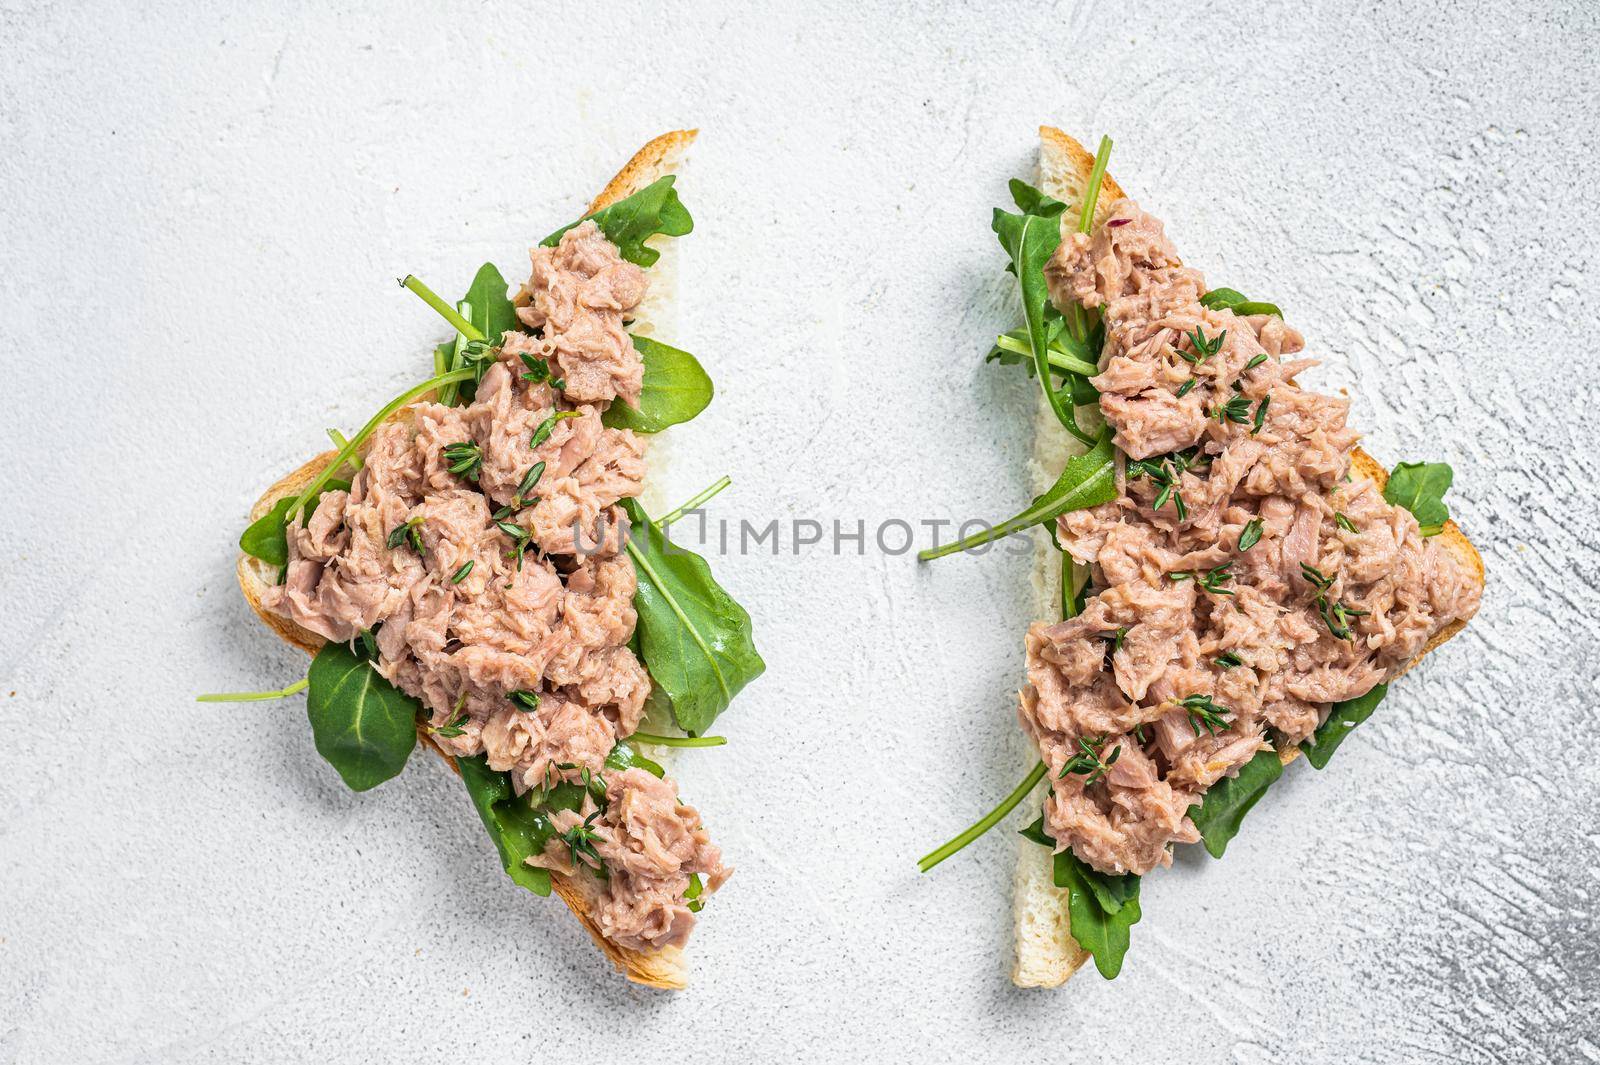 Toast with Canned Tuna fish and arugula. White background. Top view.